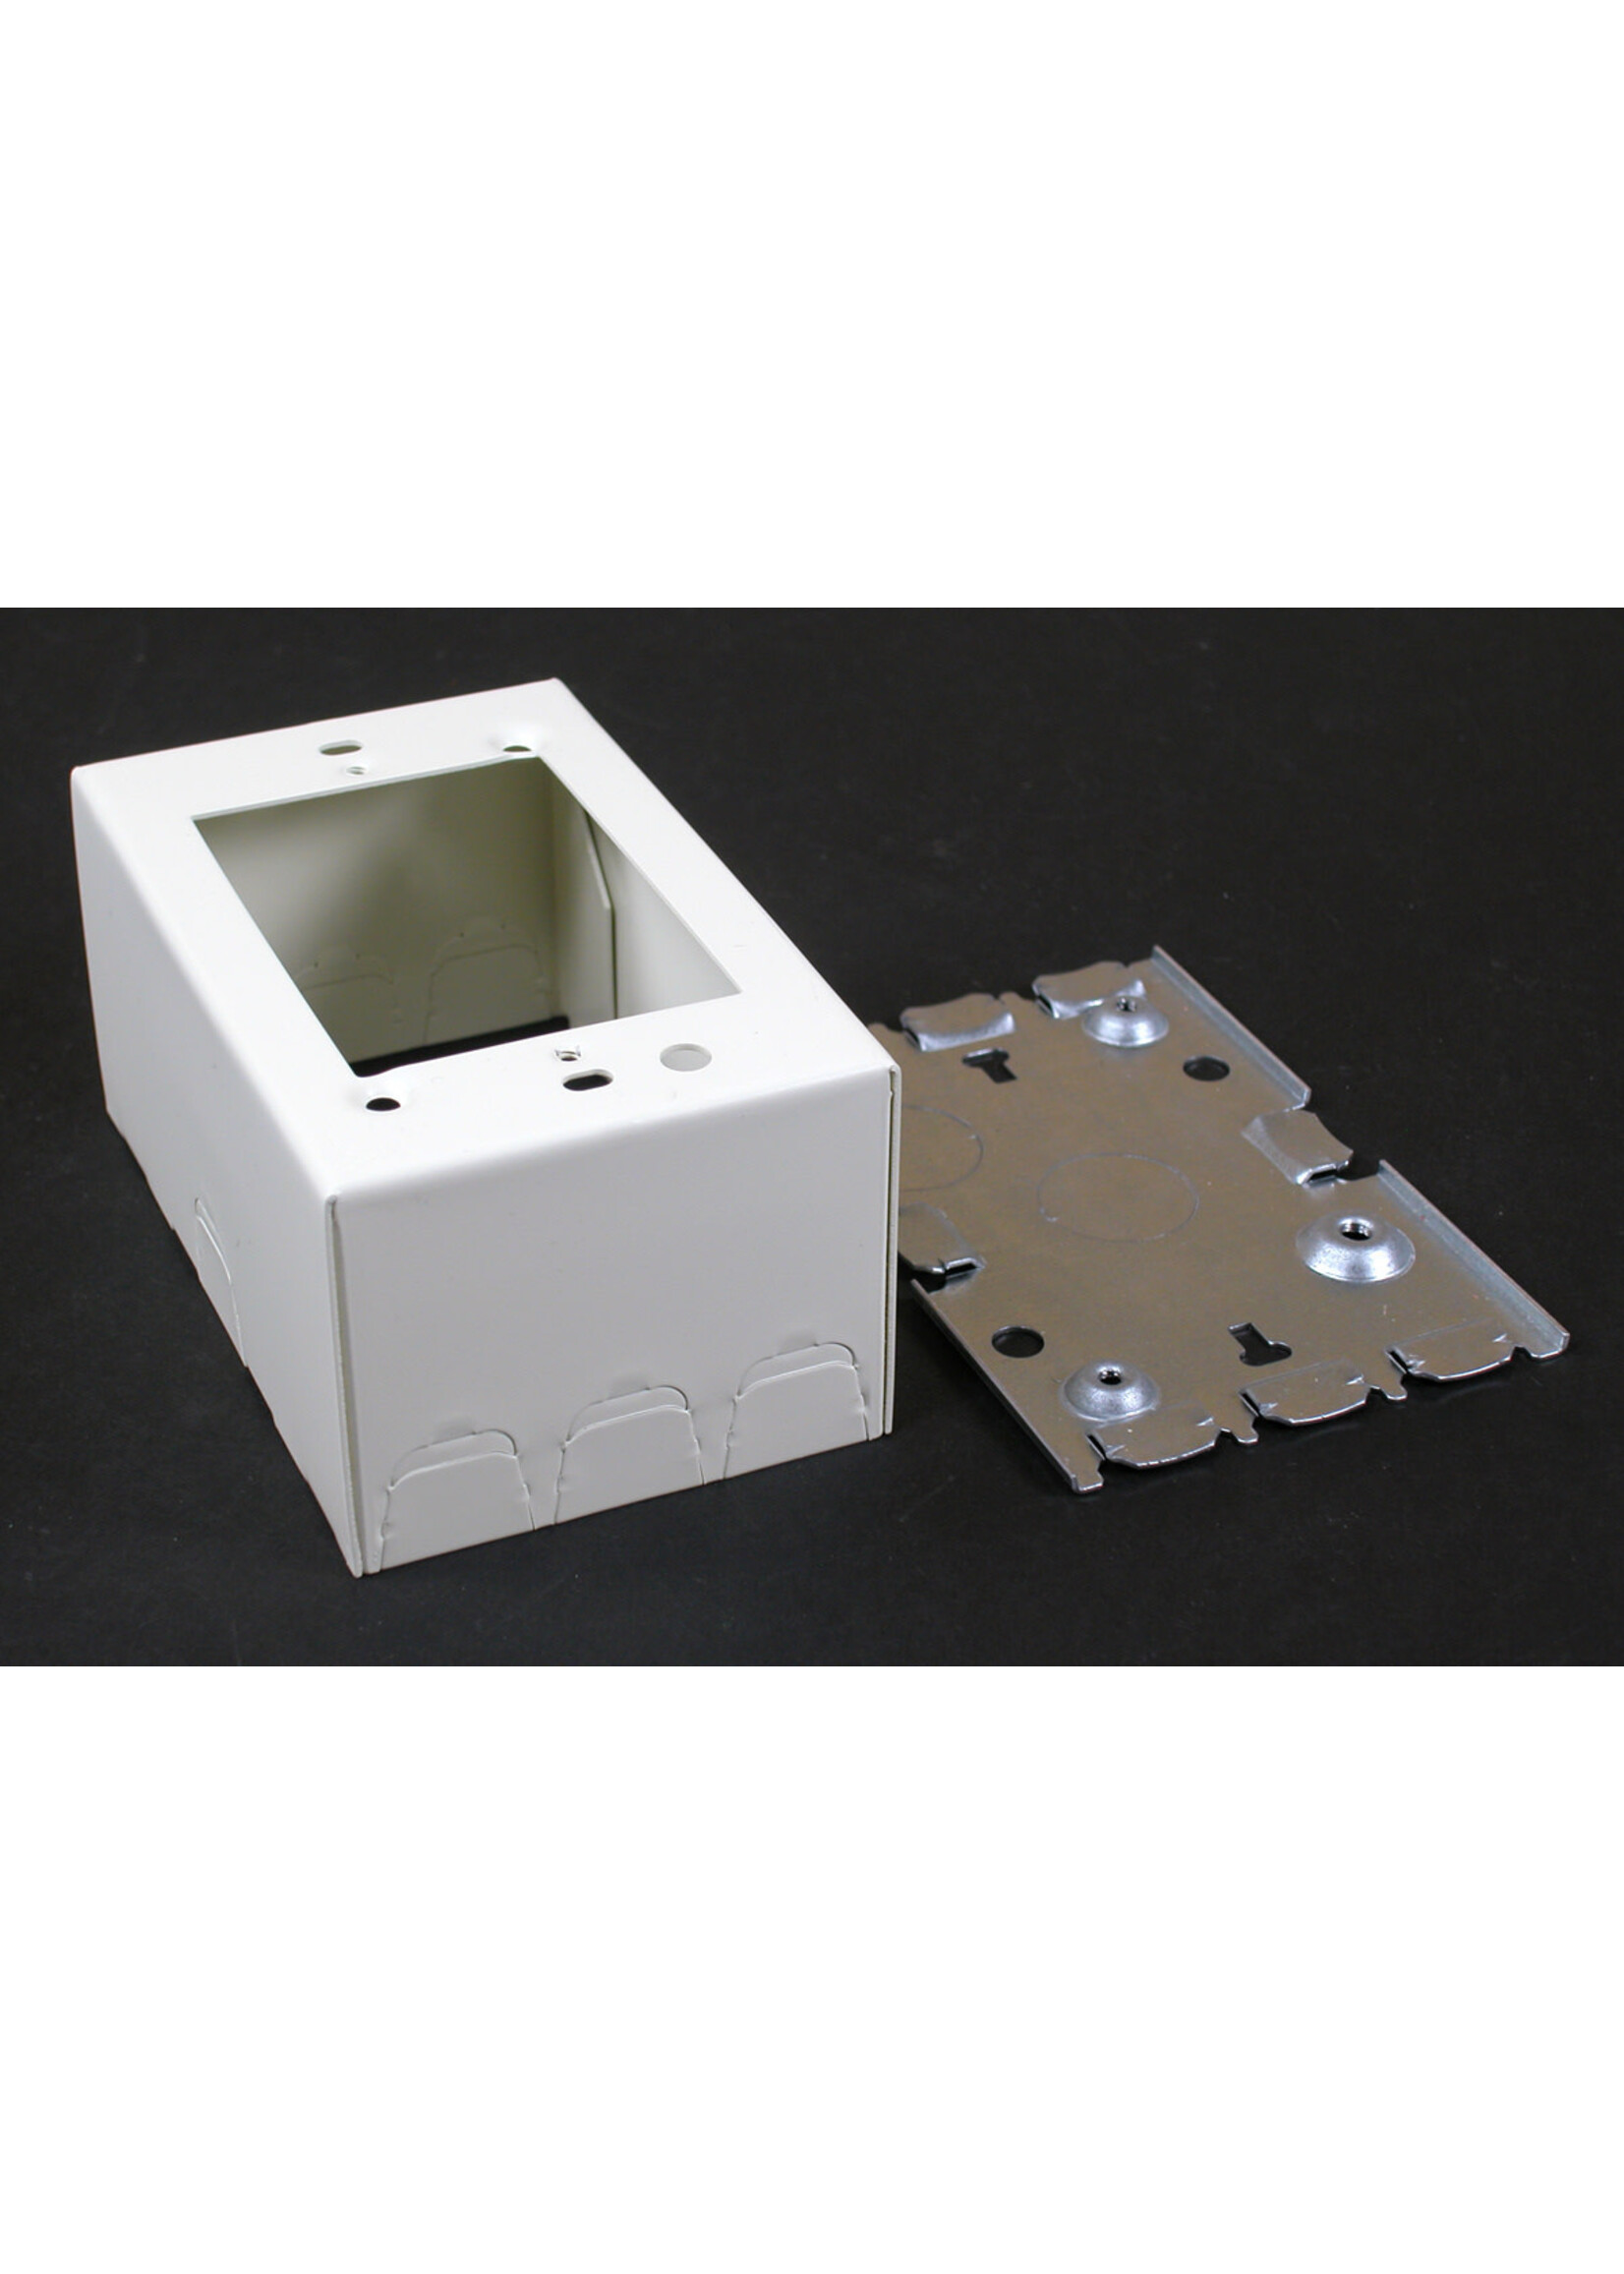 WIREMOLD V5747 Wiremold 500/700 Series Single-Gang Shallow Switch and Receptacle Box Fitting, Ivory